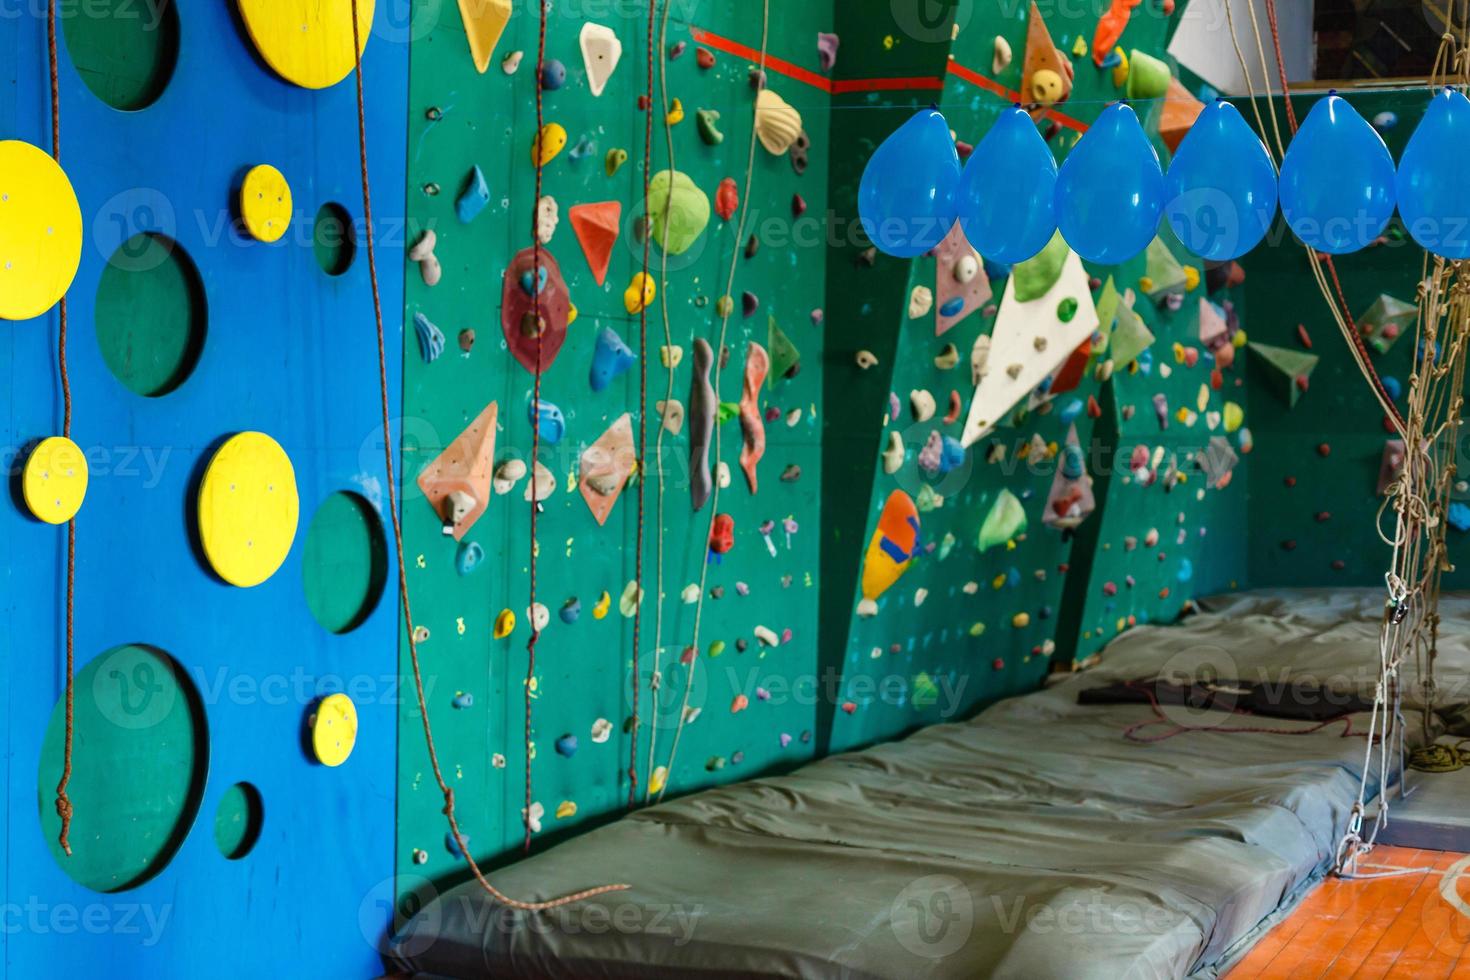 Climbing gym. Colorful footholds for training photo